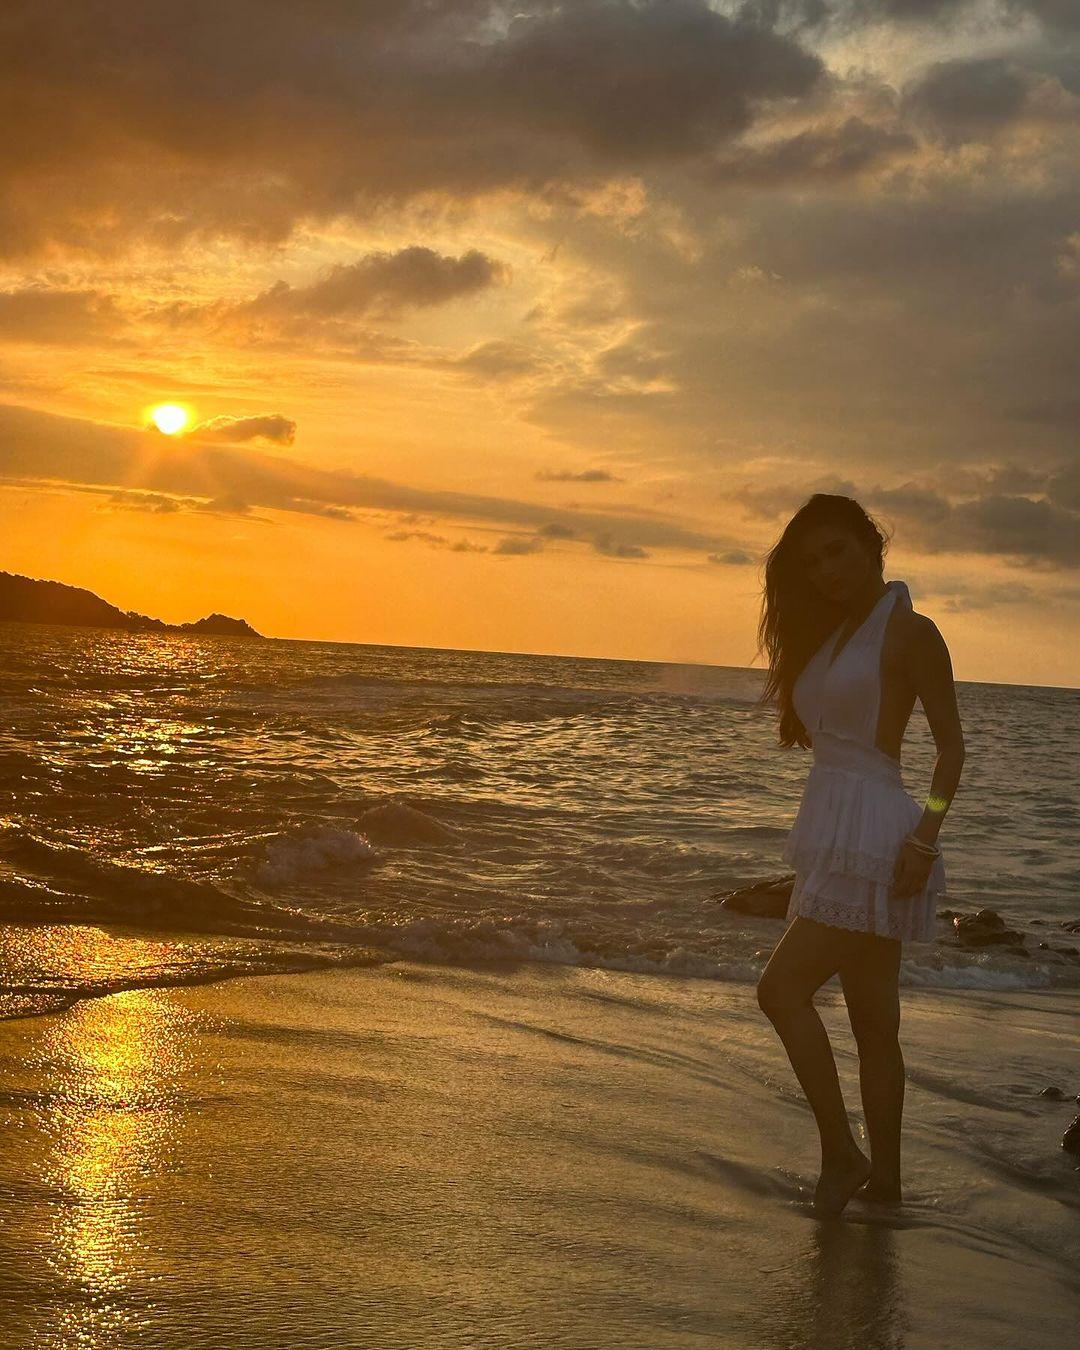 Another breathtaking shot of the Brahmastra actress by the sea during sunset